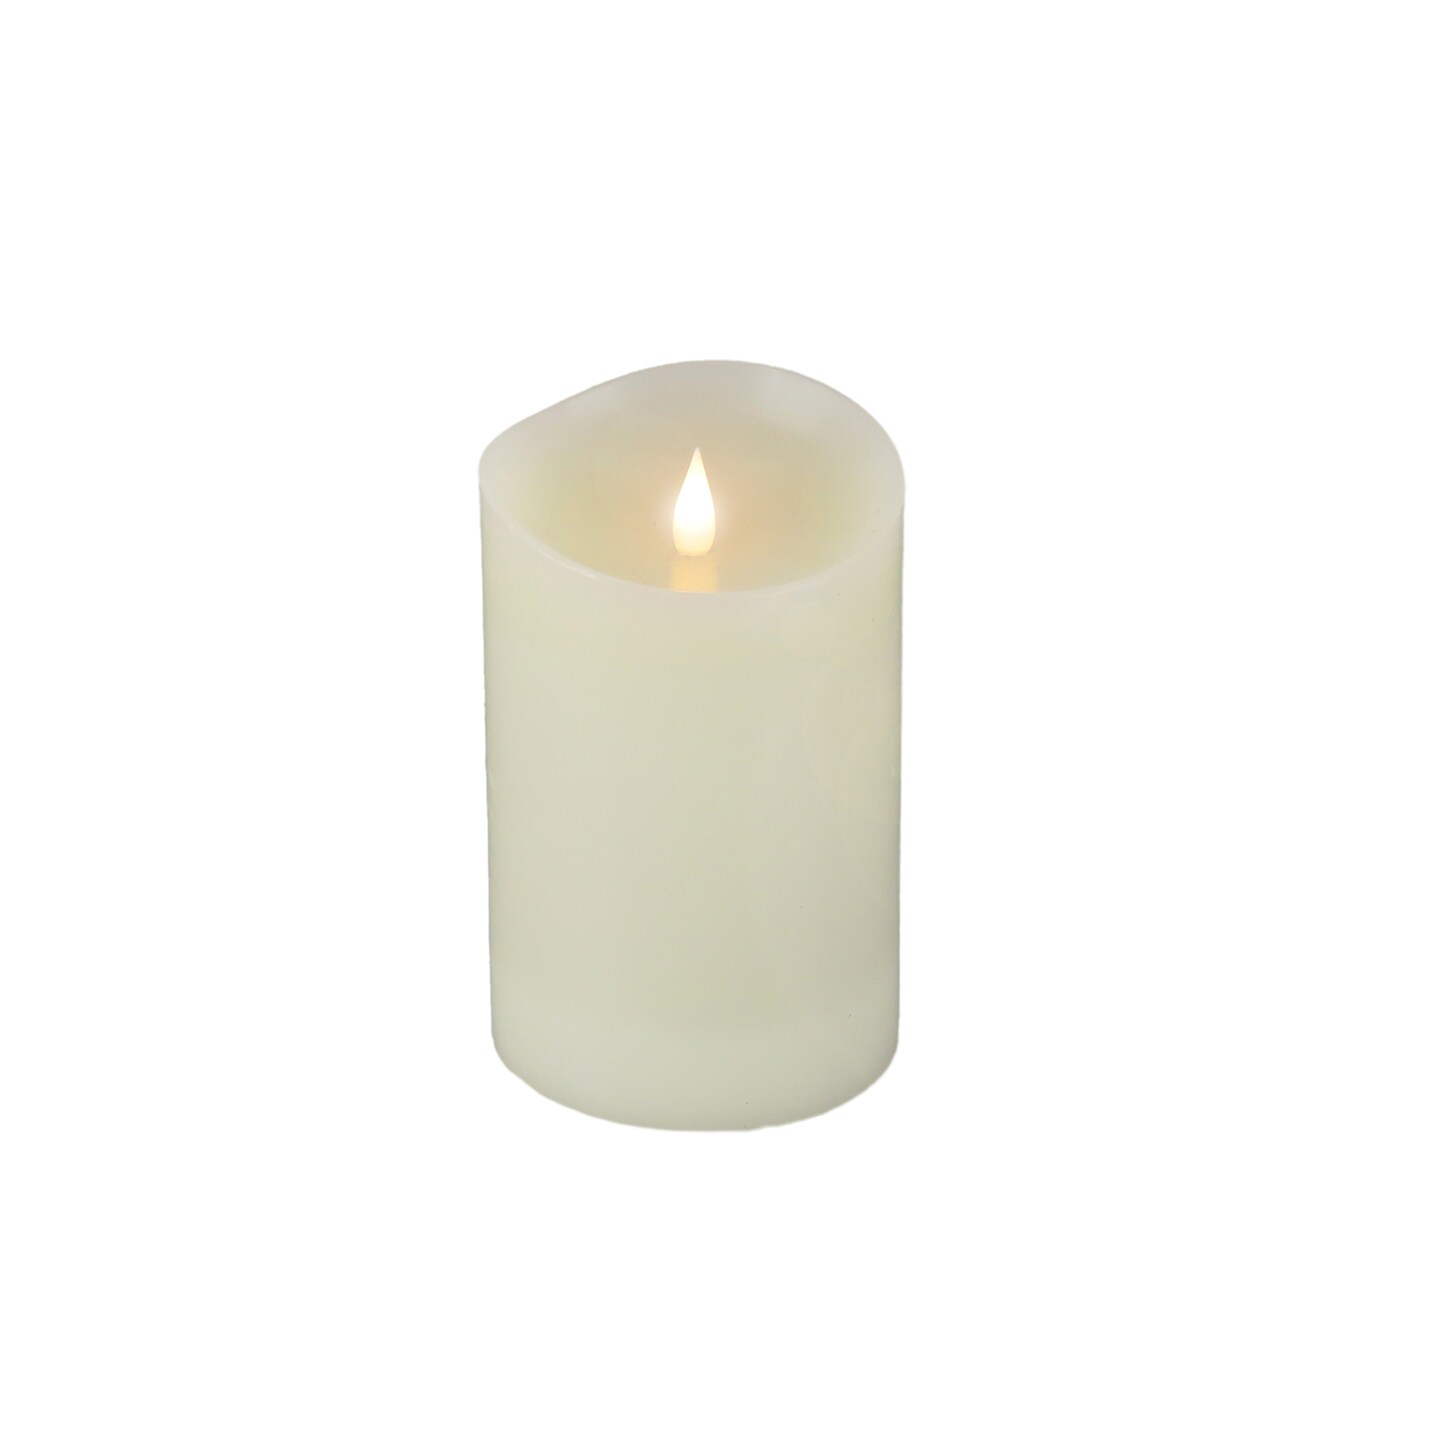 HGTV Home Collection Heritage Real Motion Real Motion Flameless Candle With Remote, Ivory with Warm White LED Lights, Battery Powered, 6 in